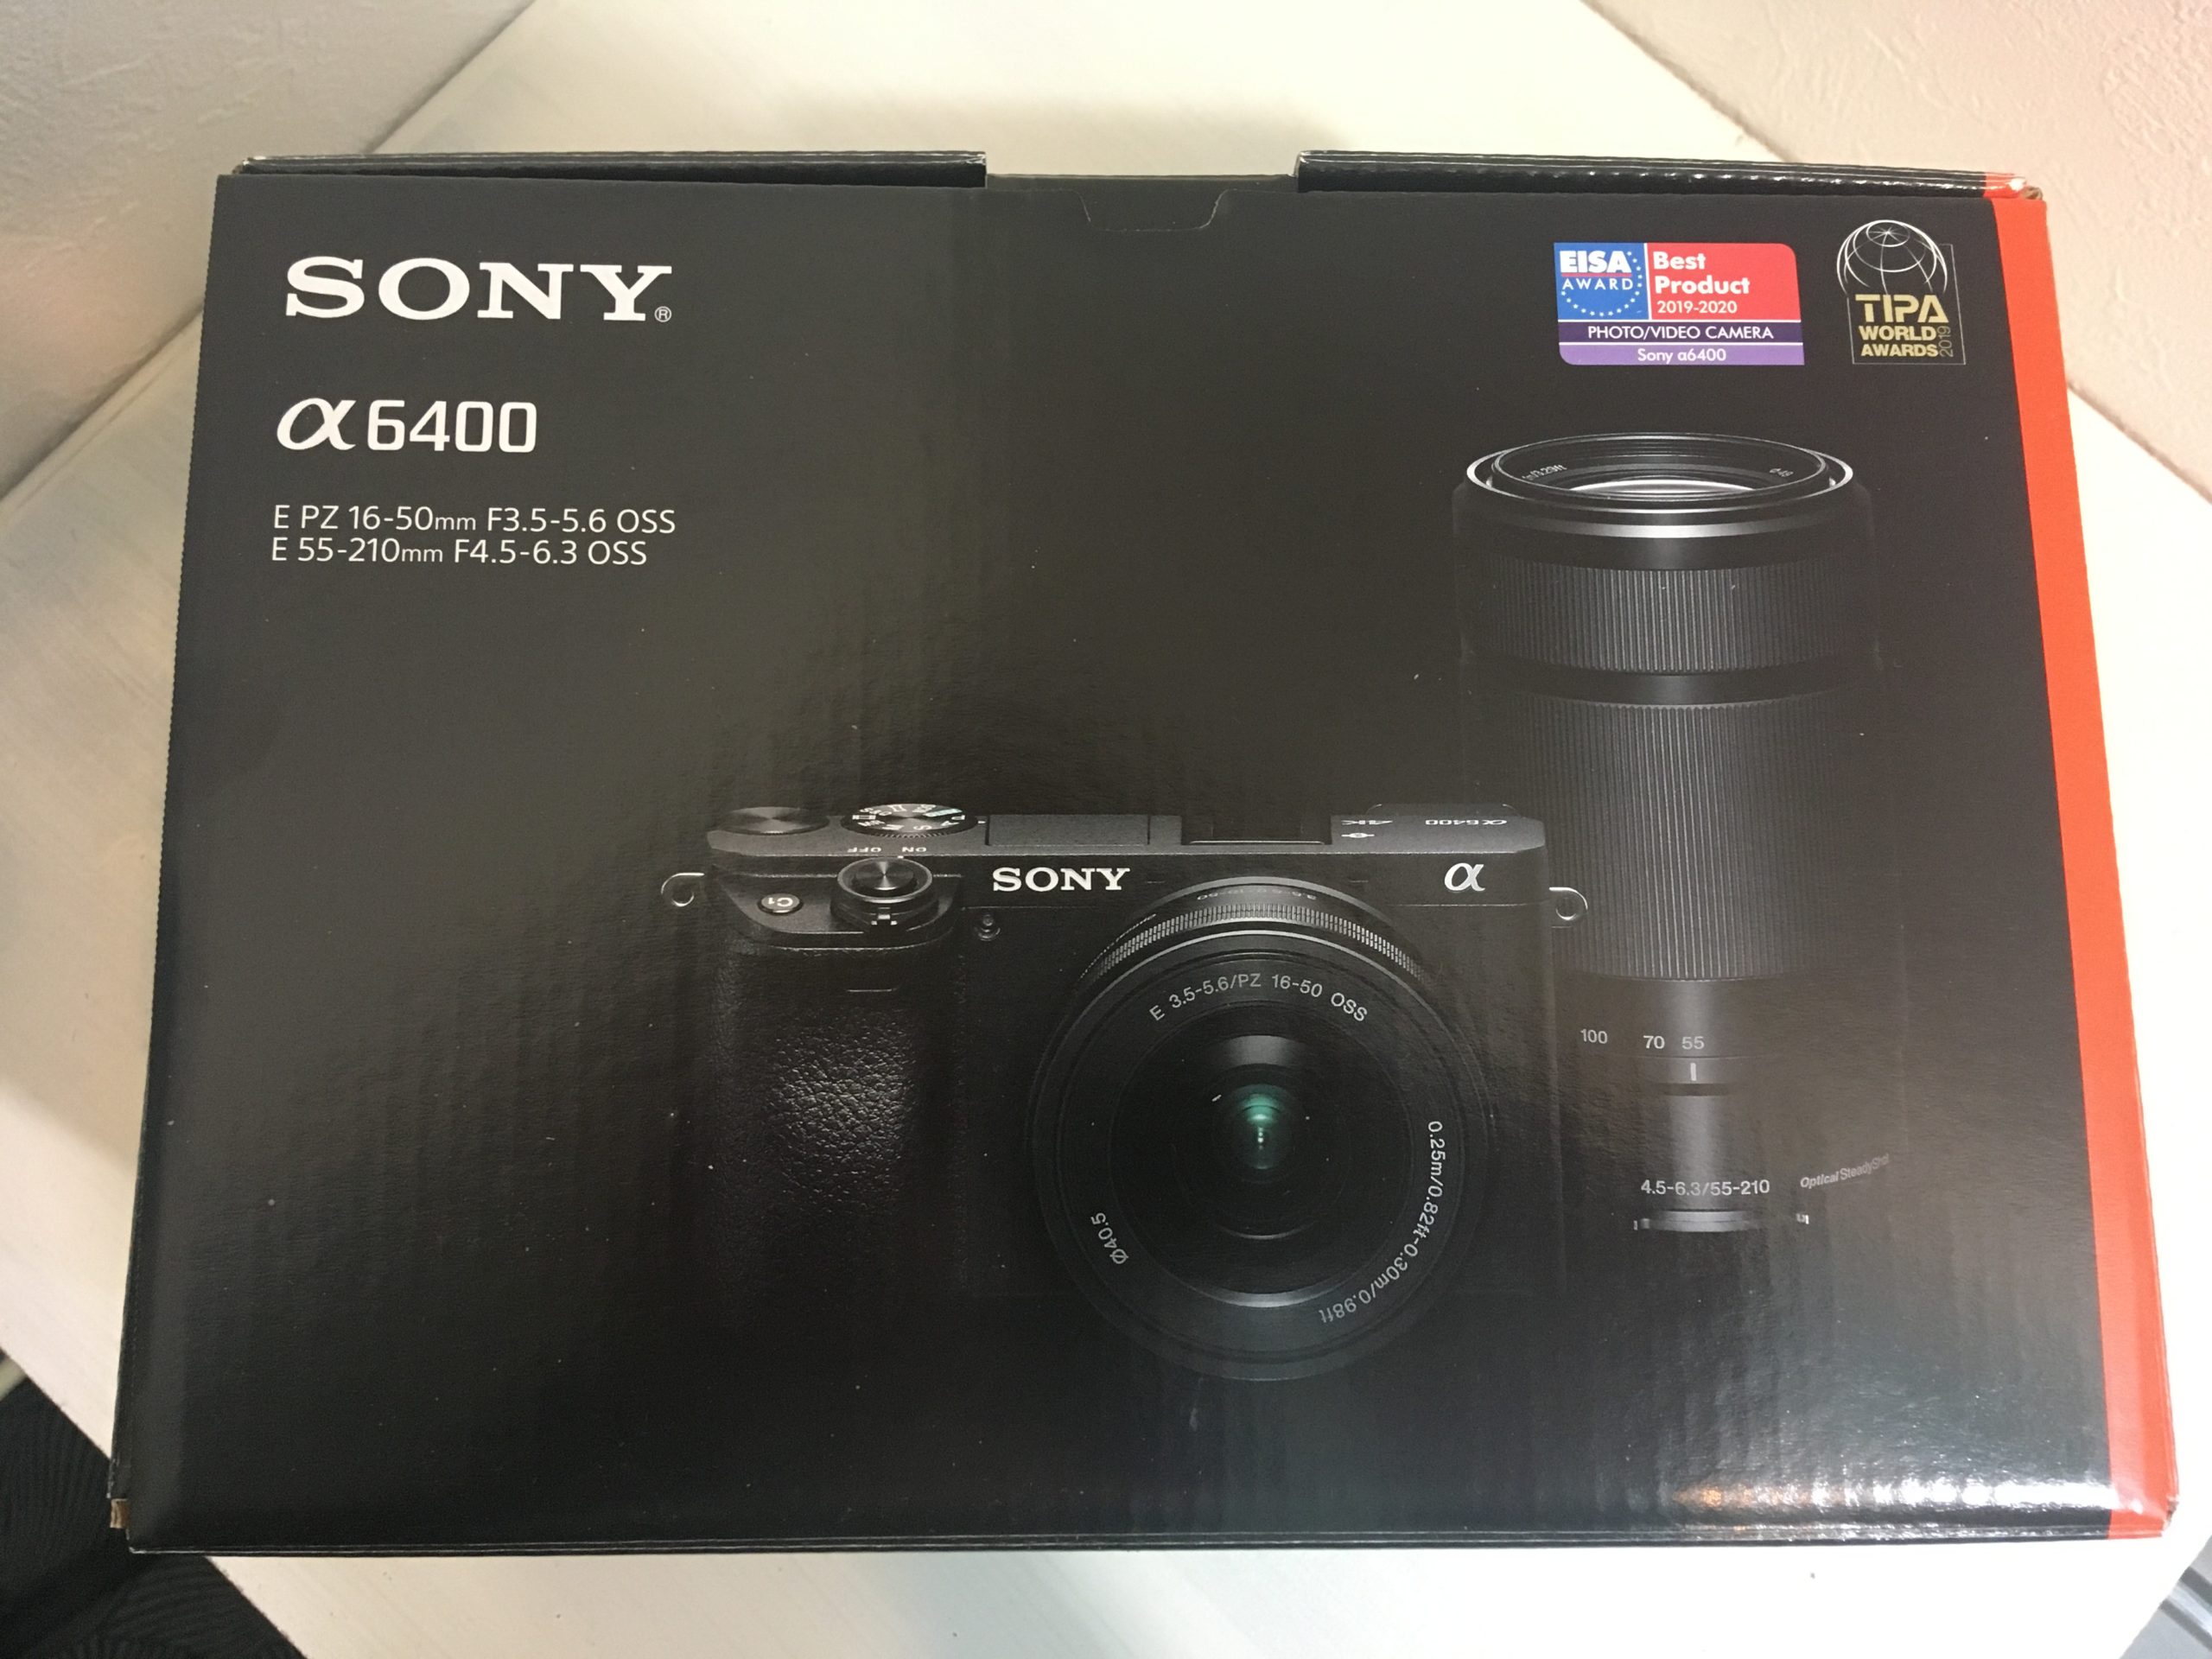 SONY】a6400購入価格は？【2020キャッシュバック】